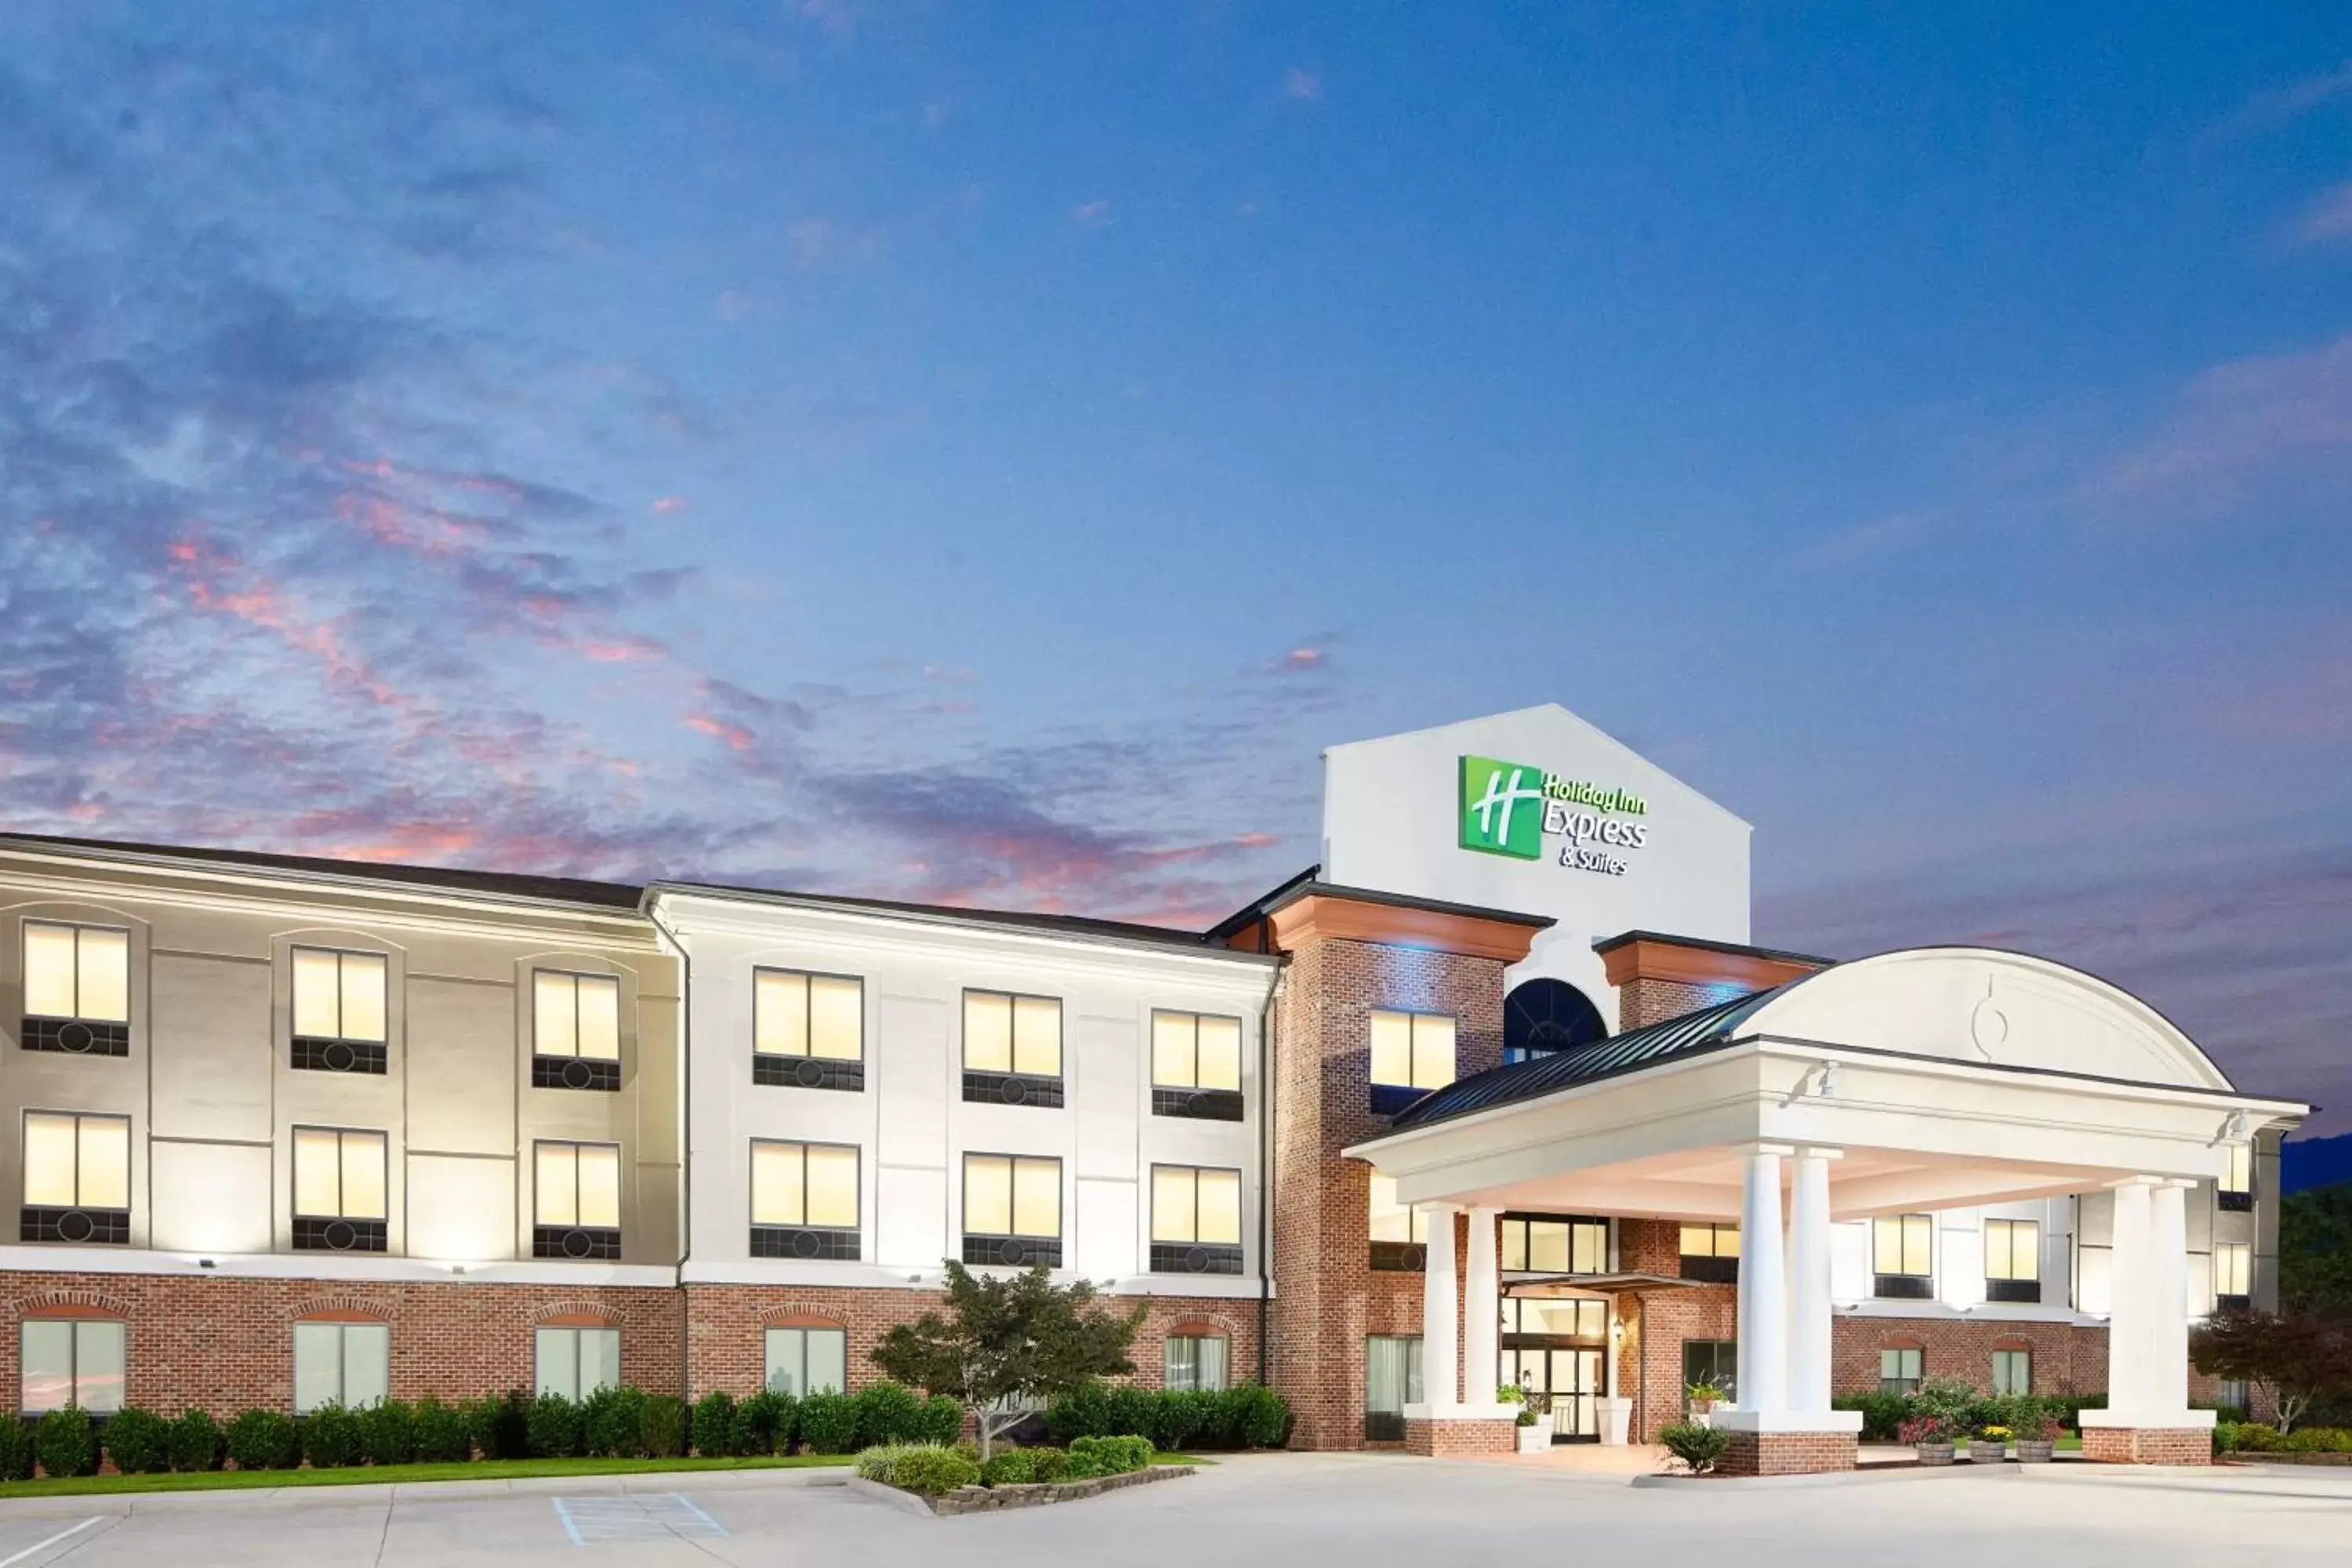 Property Building in Holiday Inn Express Hotel & Suites Salem, an IHG Hotel